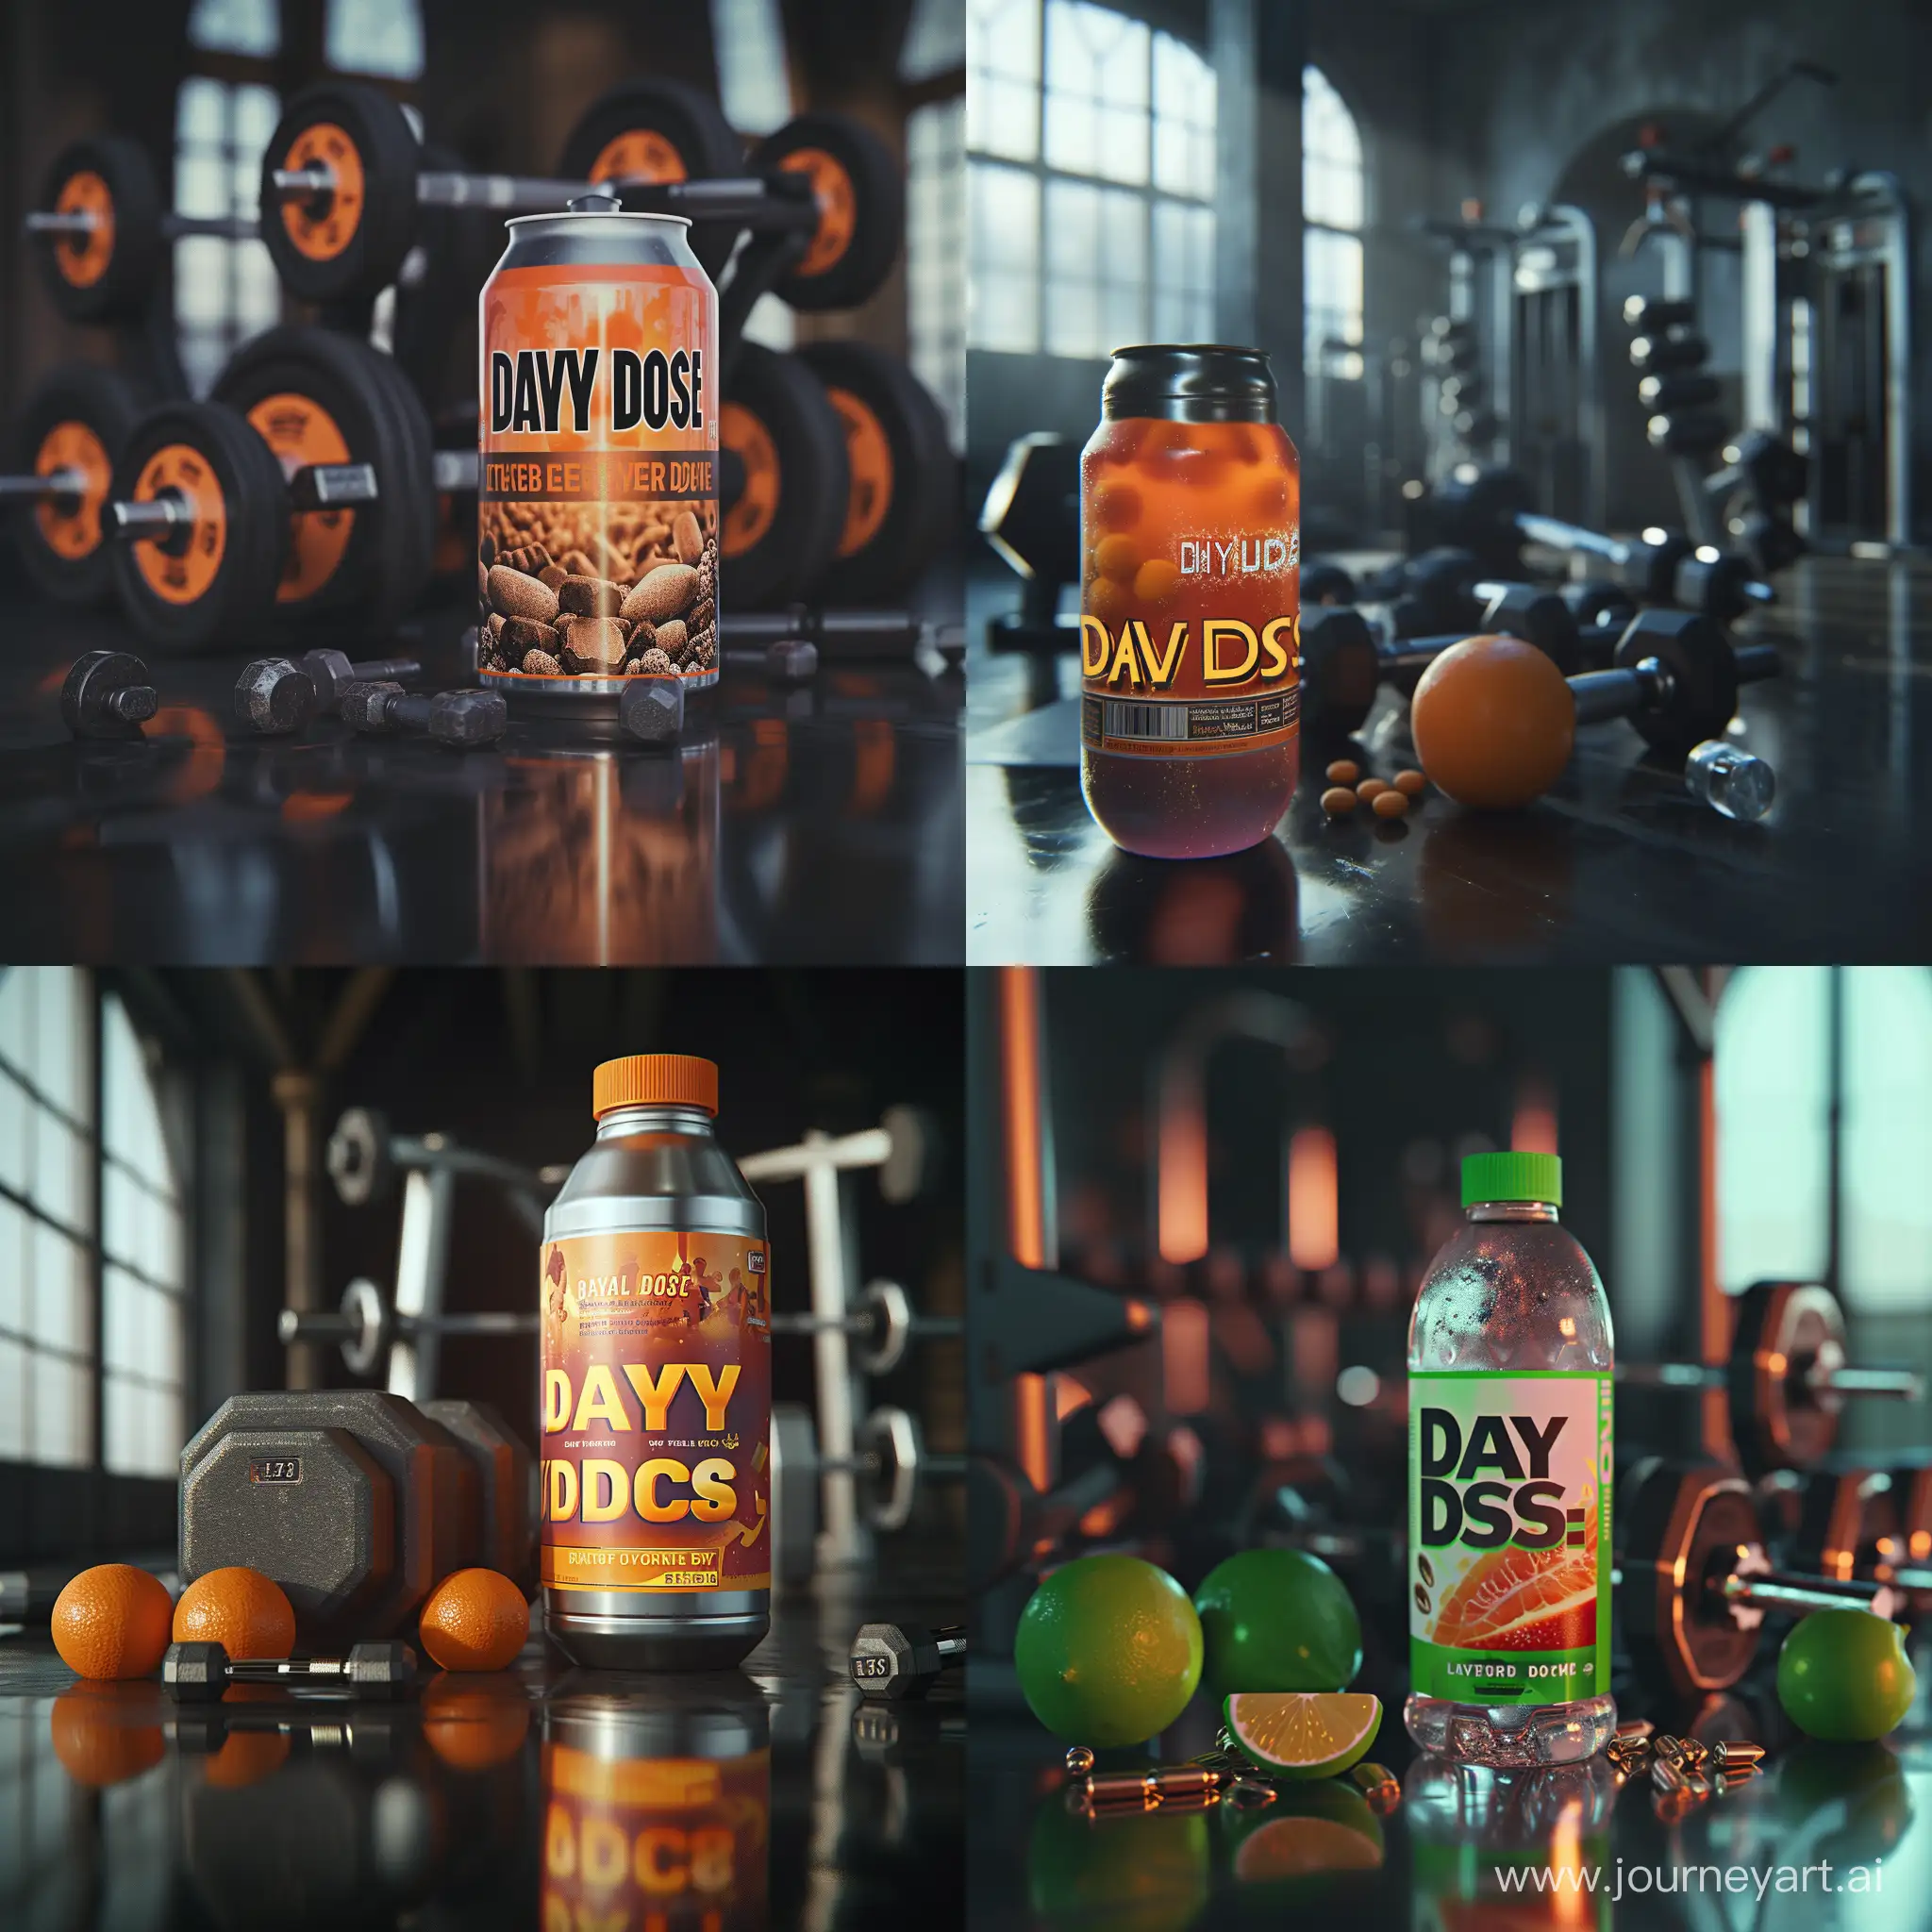 Intense-Gym-Workout-with-Daily-Dose-Energy-Drink